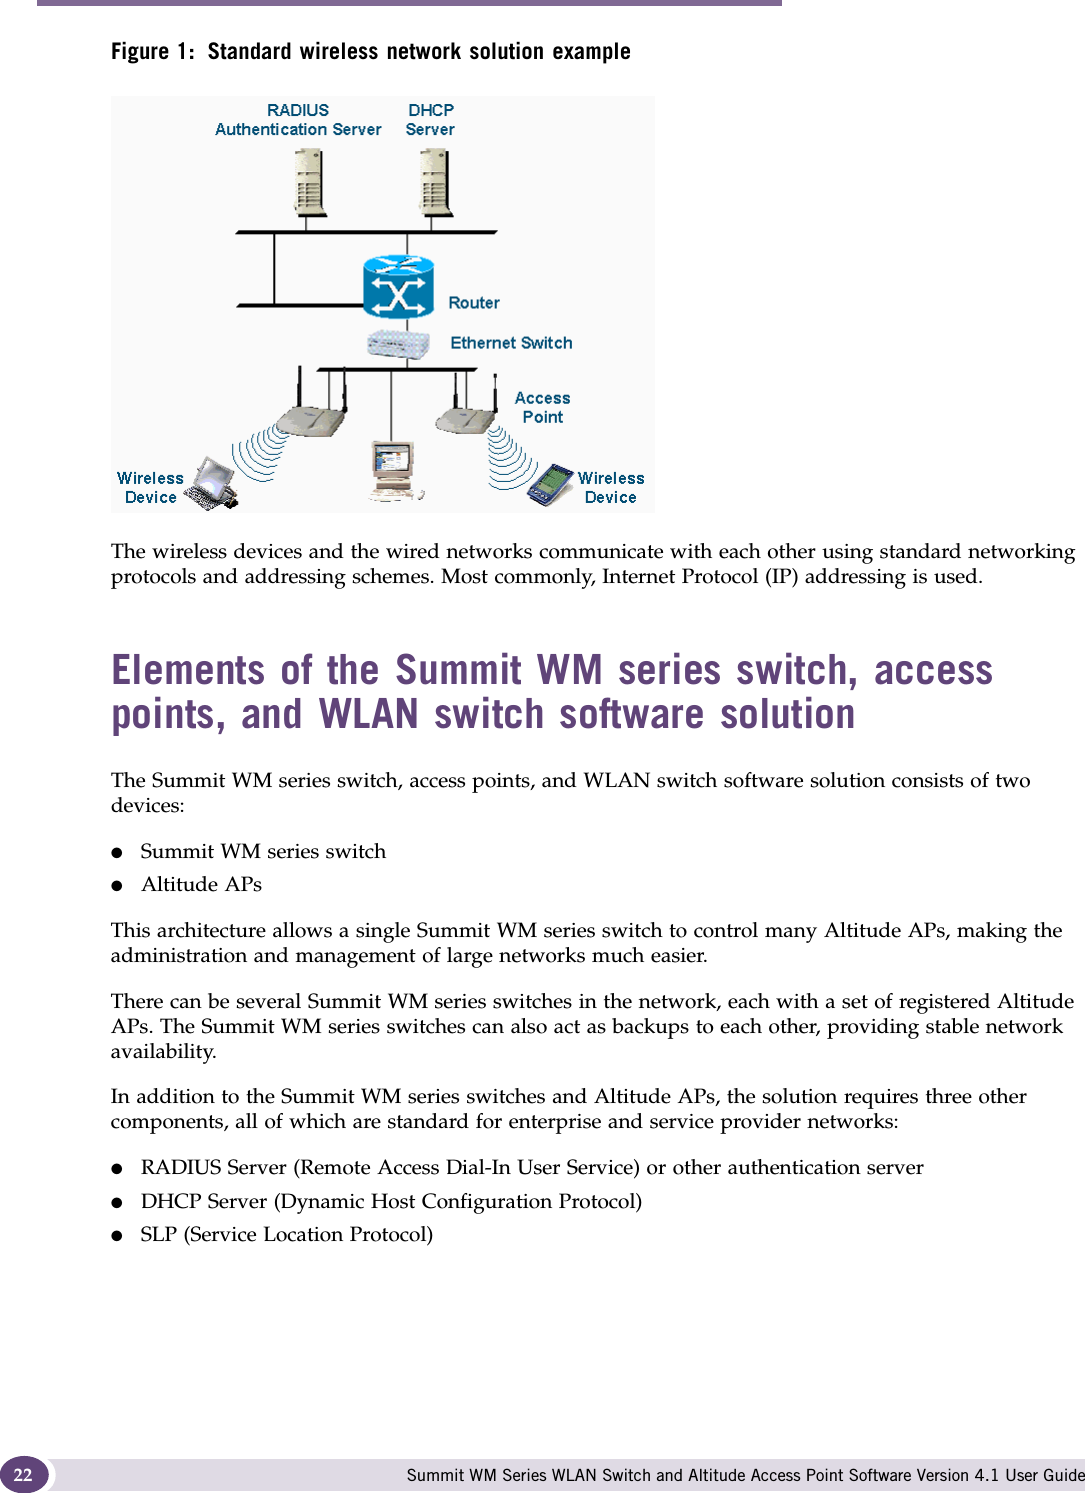 Overview of the Summit WM series switch, access points, and WLAN switch software solution Summit WM Series WLAN Switch and Altitude Access Point Software Version 4.1 User Guide22Figure 1: Standard wireless network solution exampleThe wireless devices and the wired networks communicate with each other using standard networking protocols and addressing schemes. Most commonly, Internet Protocol (IP) addressing is used.Elements of the Summit WM series switch, access points, and WLAN switch software solutionThe Summit WM series switch, access points, and WLAN switch software solution consists of two devices:●Summit WM series switch●Altitude APsThis architecture allows a single Summit WM series switch to control many Altitude APs, making the administration and management of large networks much easier.There can be several Summit WM series switches in the network, each with a set of registered Altitude APs. The Summit WM series switches can also act as backups to each other, providing stable network availability.In addition to the Summit WM series switches and Altitude APs, the solution requires three other components, all of which are standard for enterprise and service provider networks:●RADIUS Server (Remote Access Dial-In User Service) or other authentication server●DHCP Server (Dynamic Host Configuration Protocol) ●SLP (Service Location Protocol)